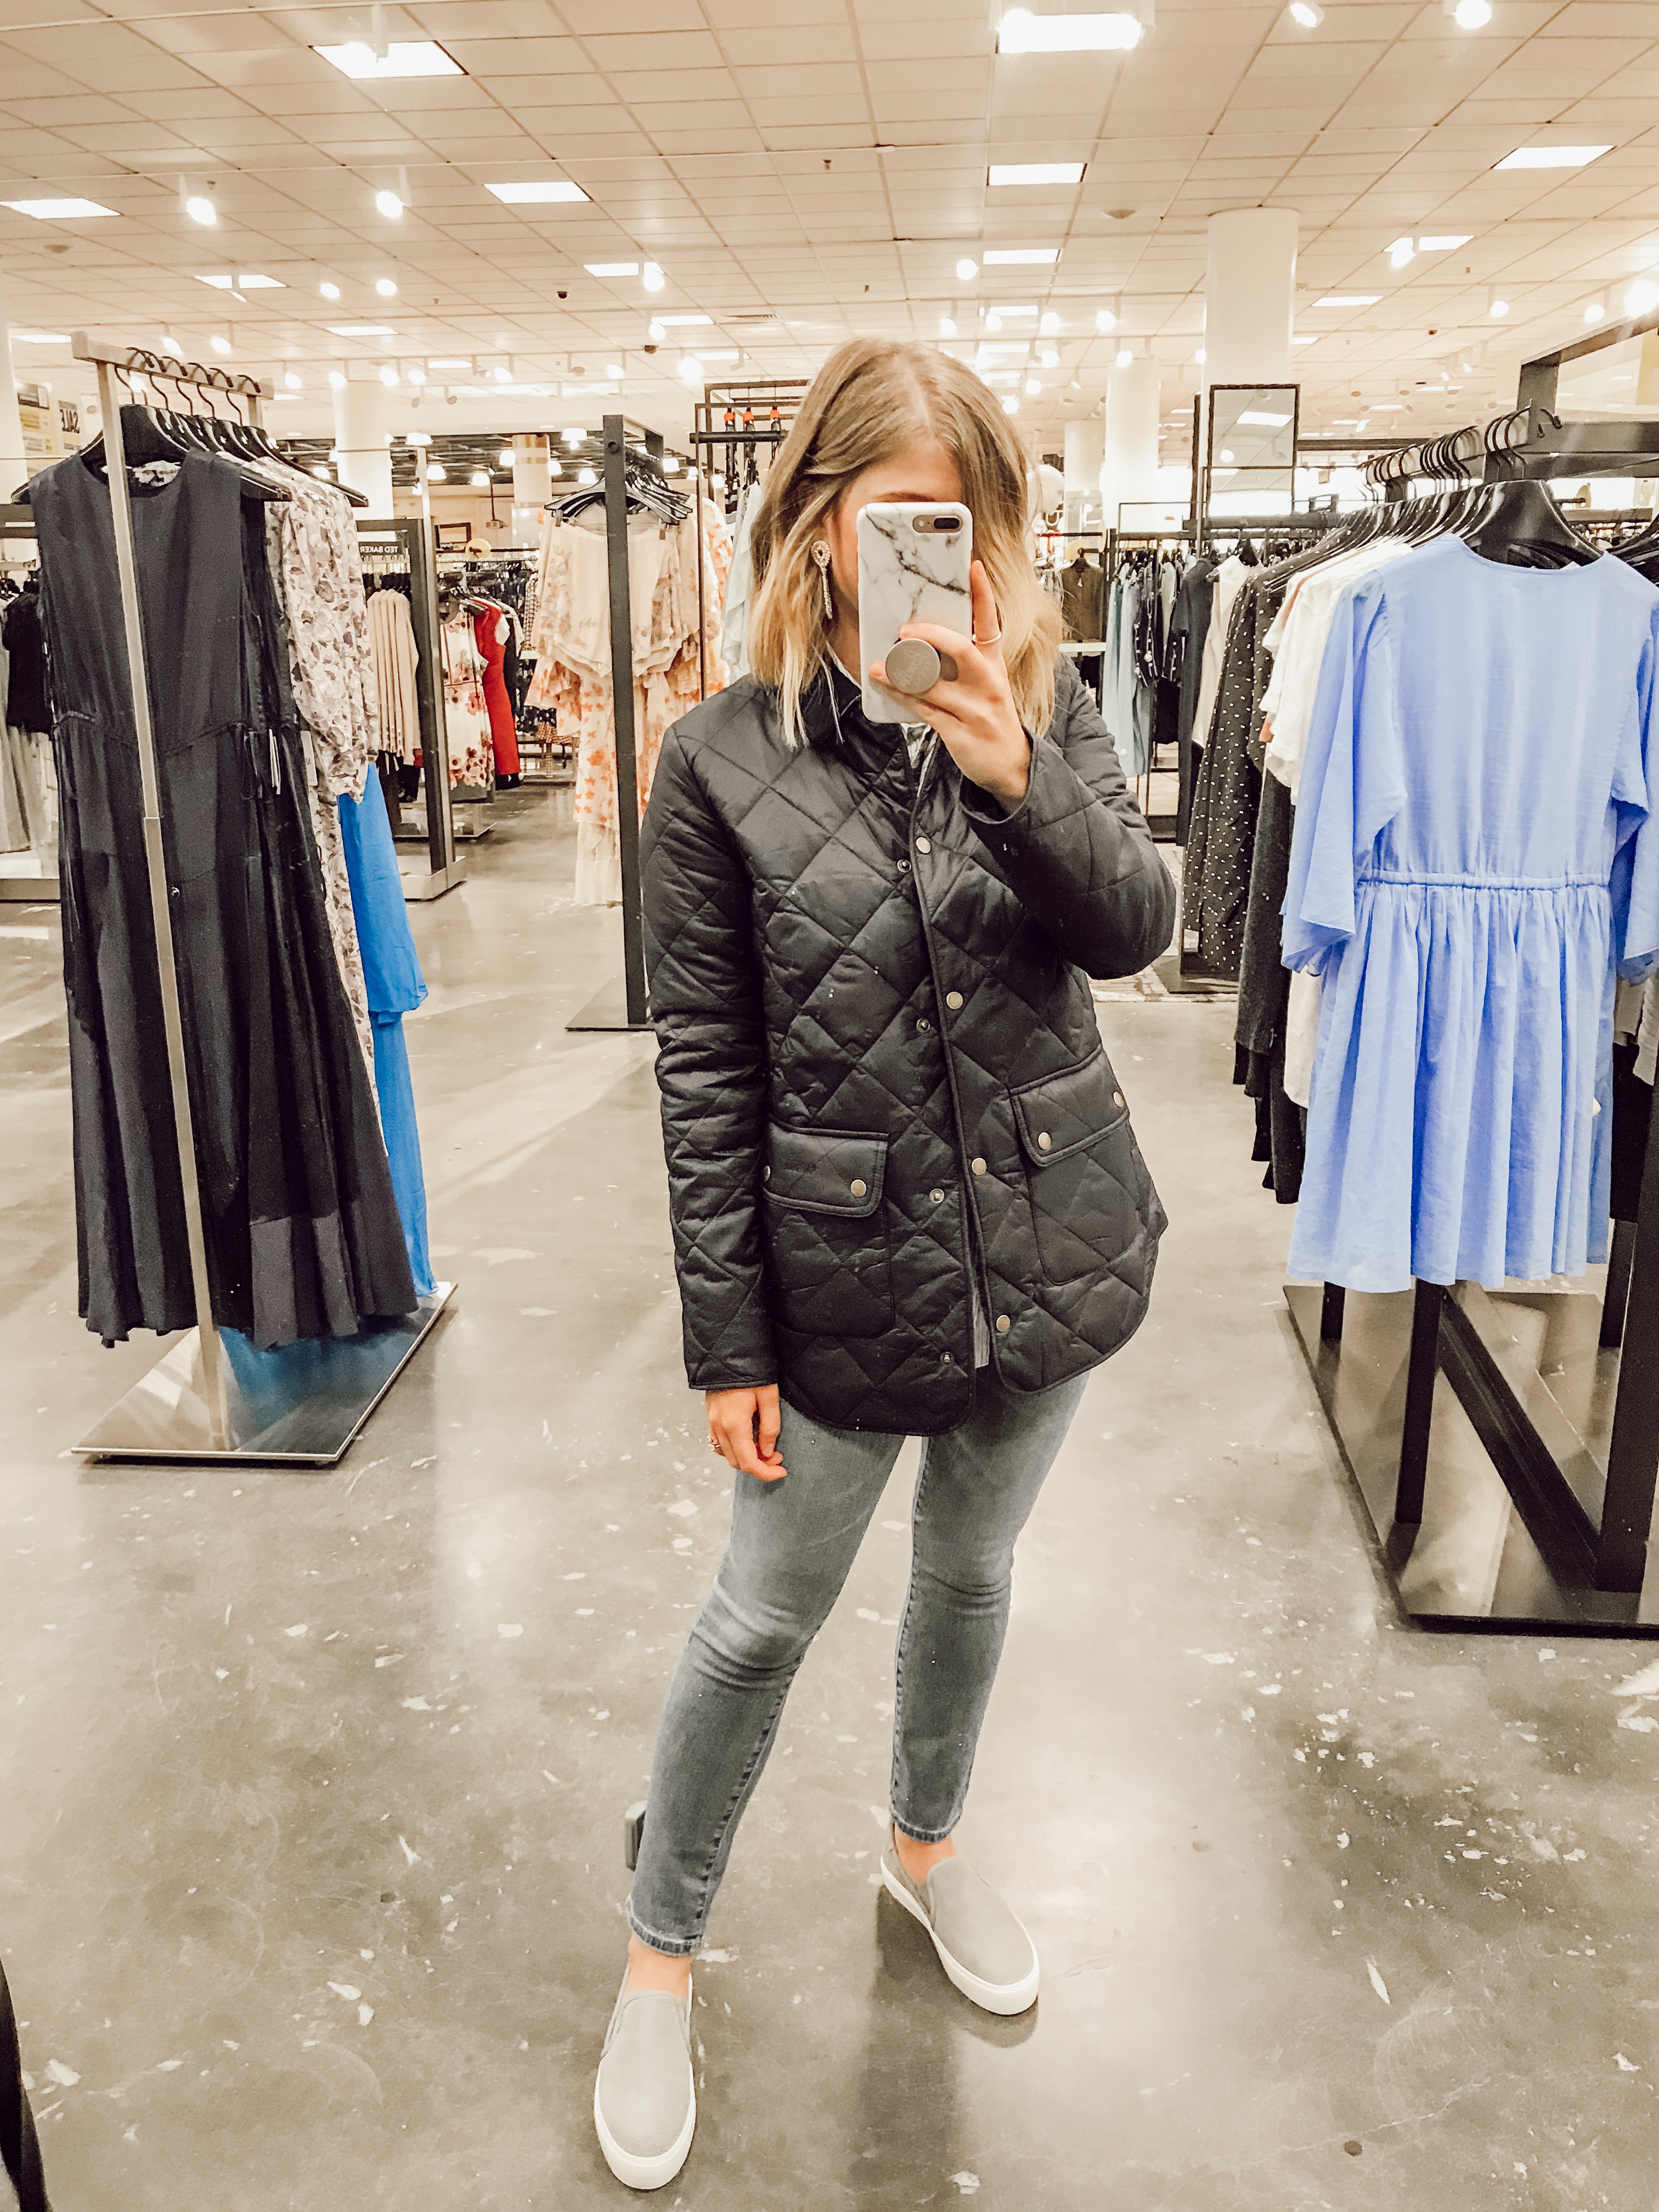 Barbour Oakland Quilted Jacket | 2019 Nordstrom Anniversary Fitting Room Session featured on Louella Reese Life & Style Blog